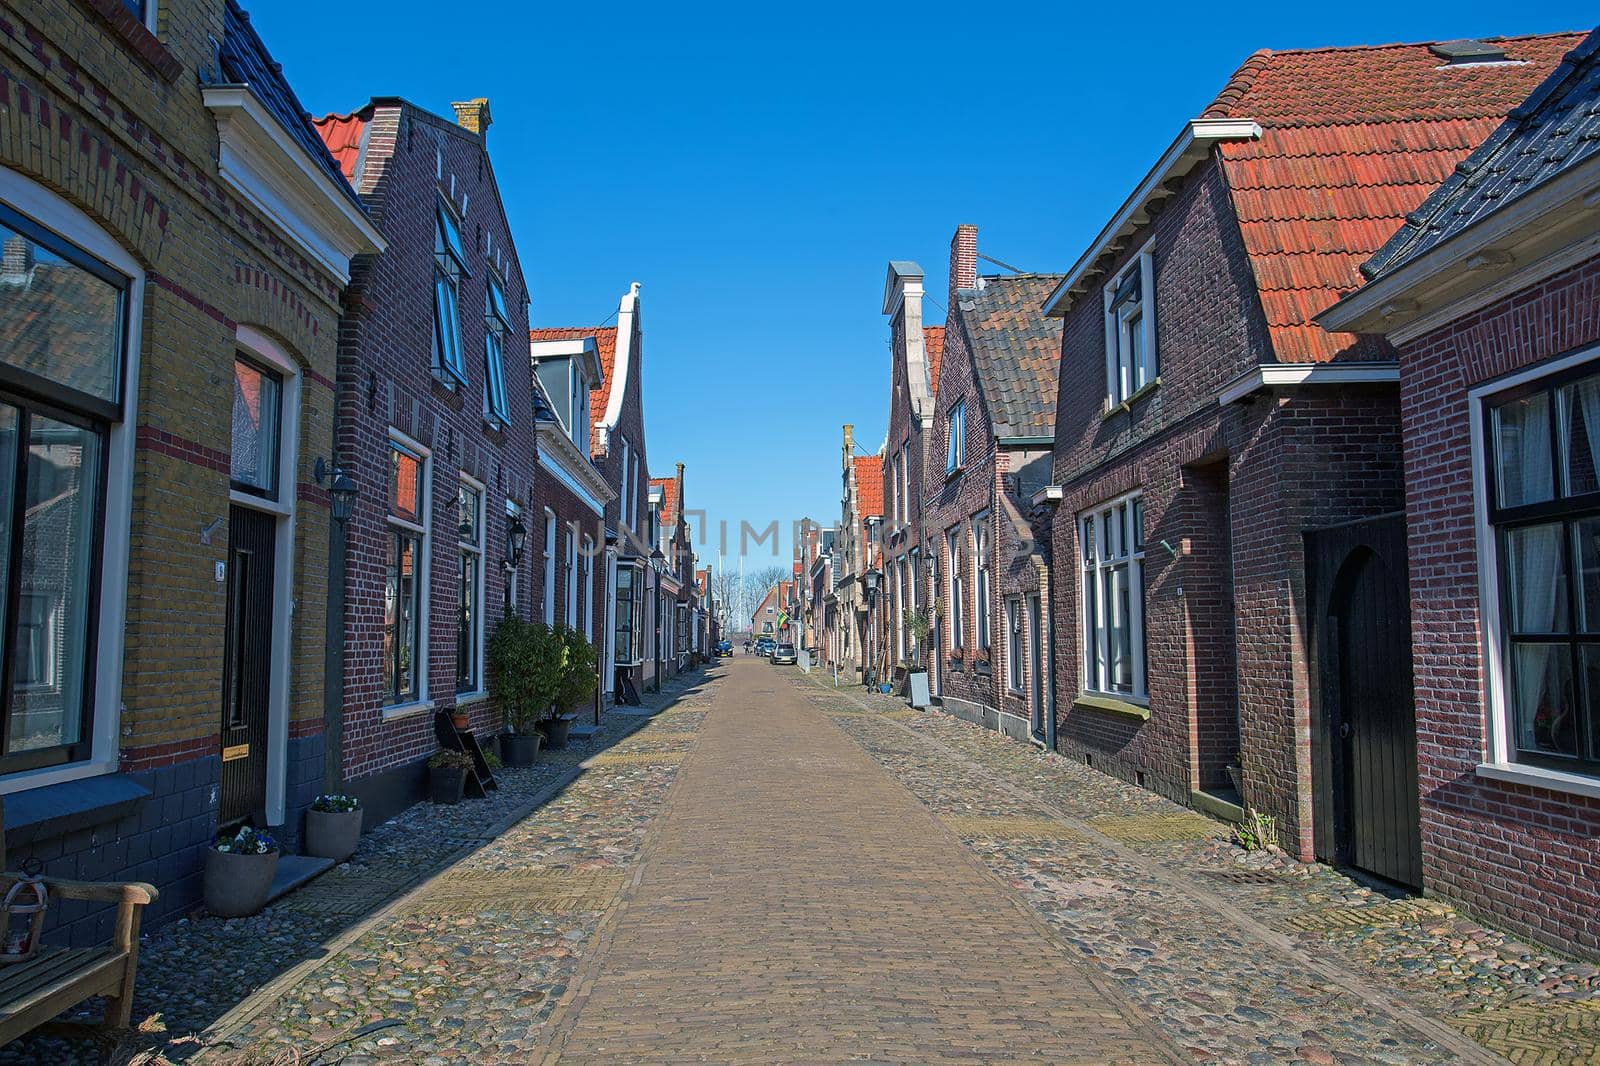 Medieval houses in the streets of Hindeloopen in the Netherlands by devy